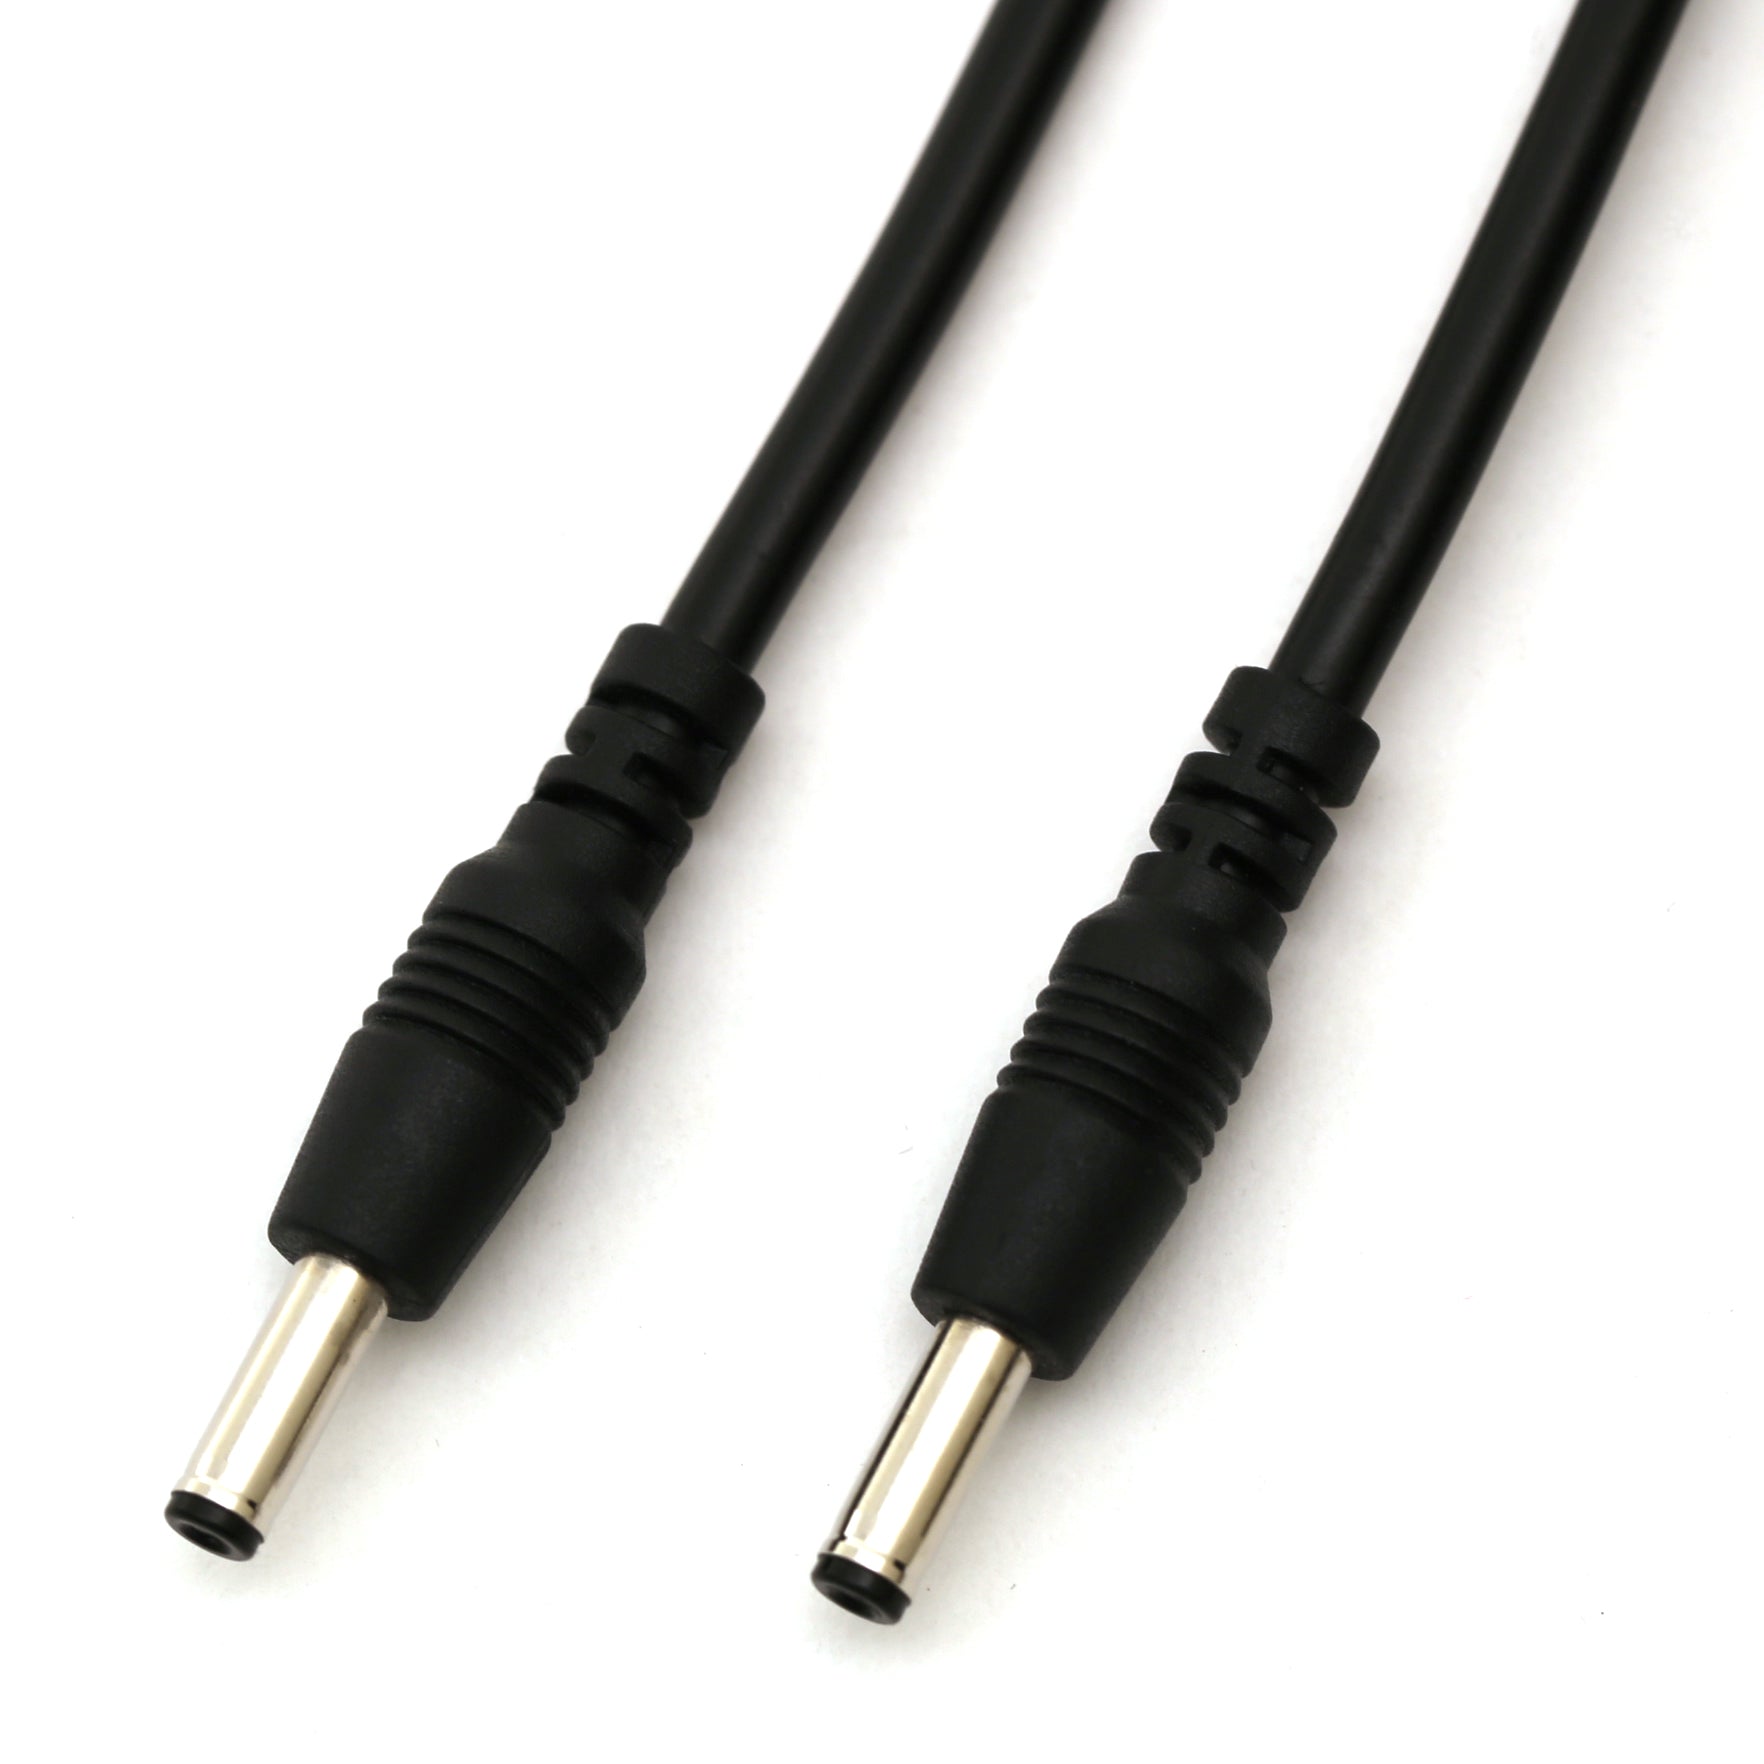 35ft In-Wall Rated Interconnect Cable for Modular LED Under Cabinet Lighting (Black)